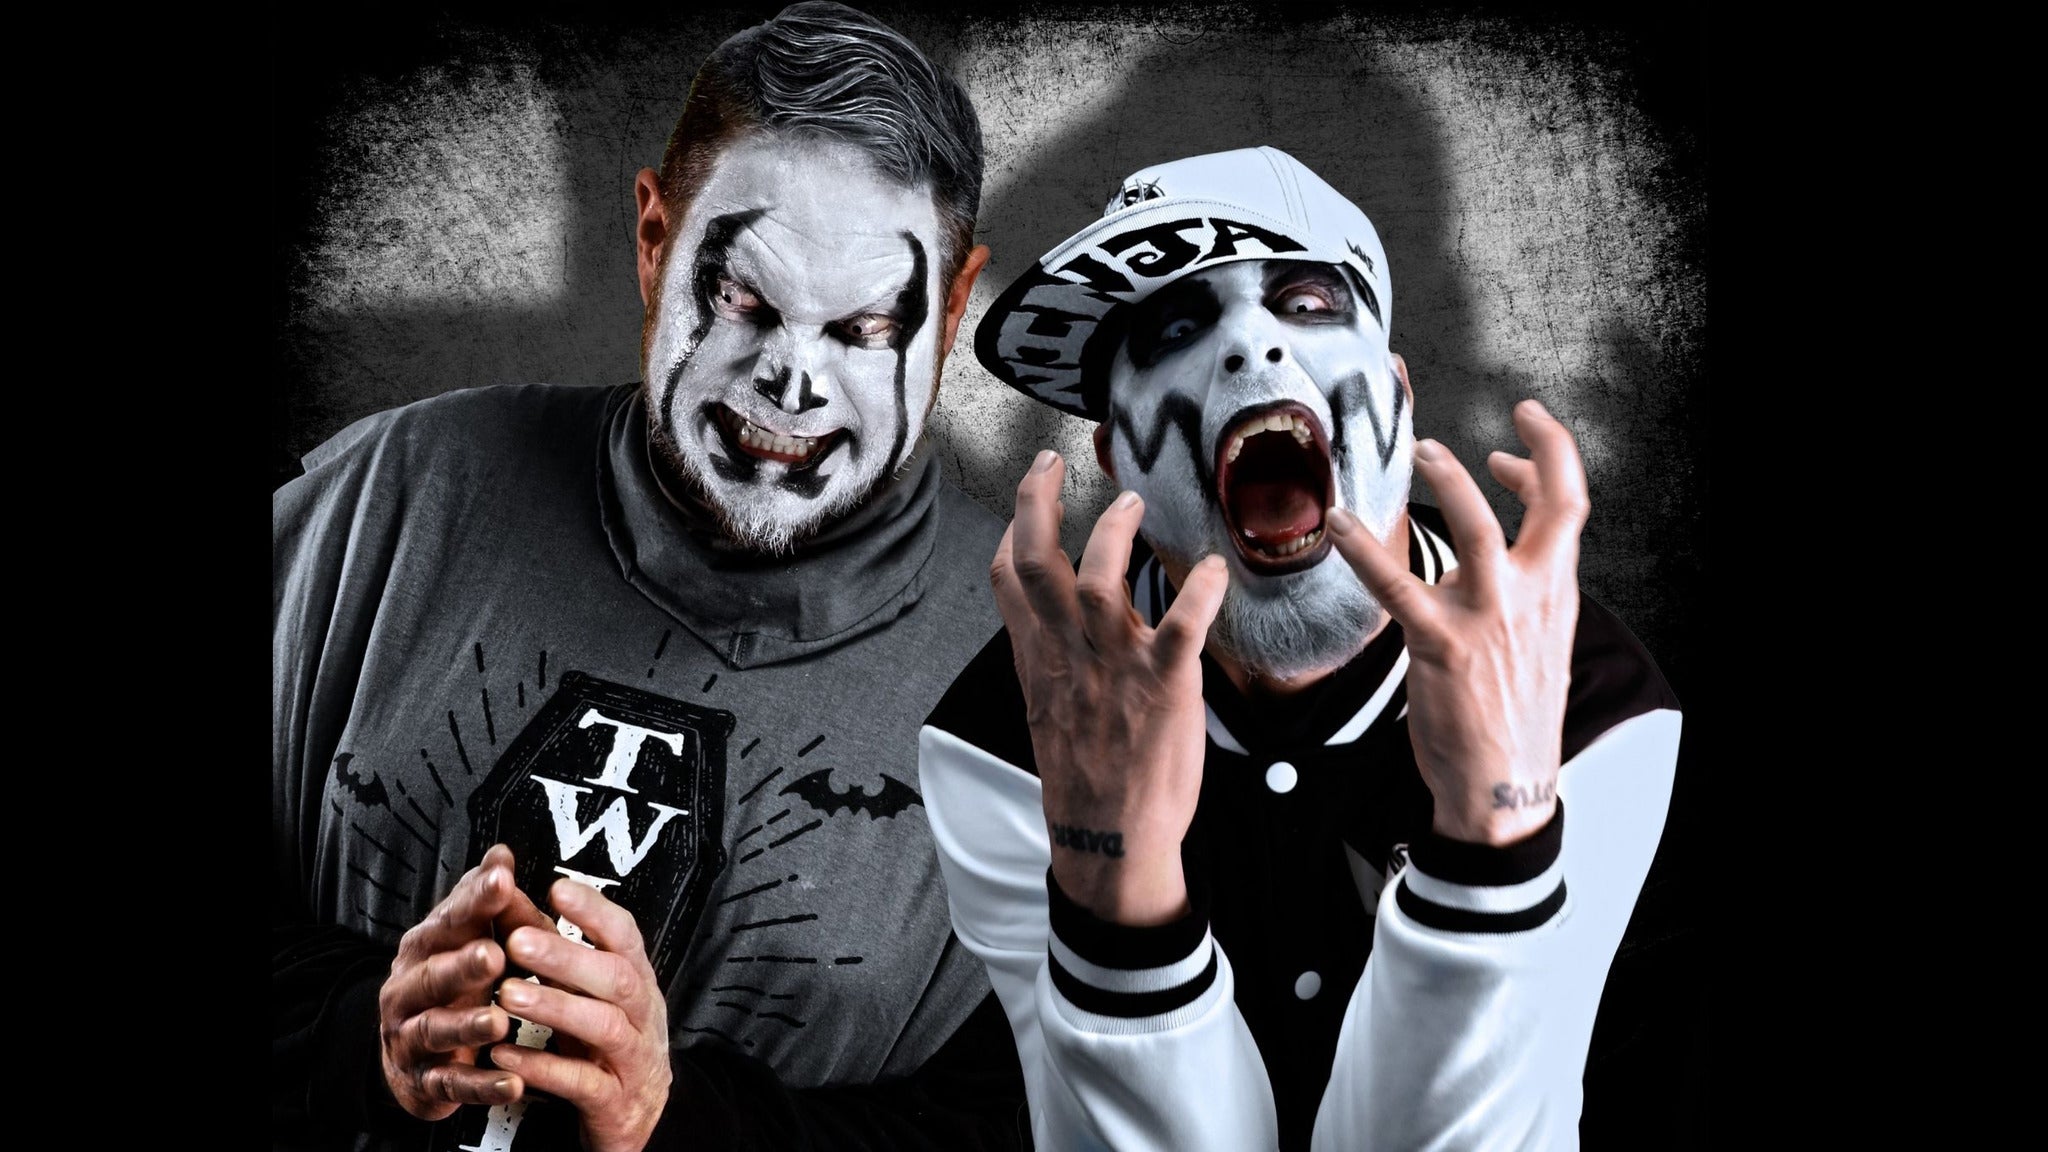 FRIGHT FEST:Attack of the Ninjas TWIZTID w/Blaze, ABK, Boondox & more! presale code for early tickets in Detroit